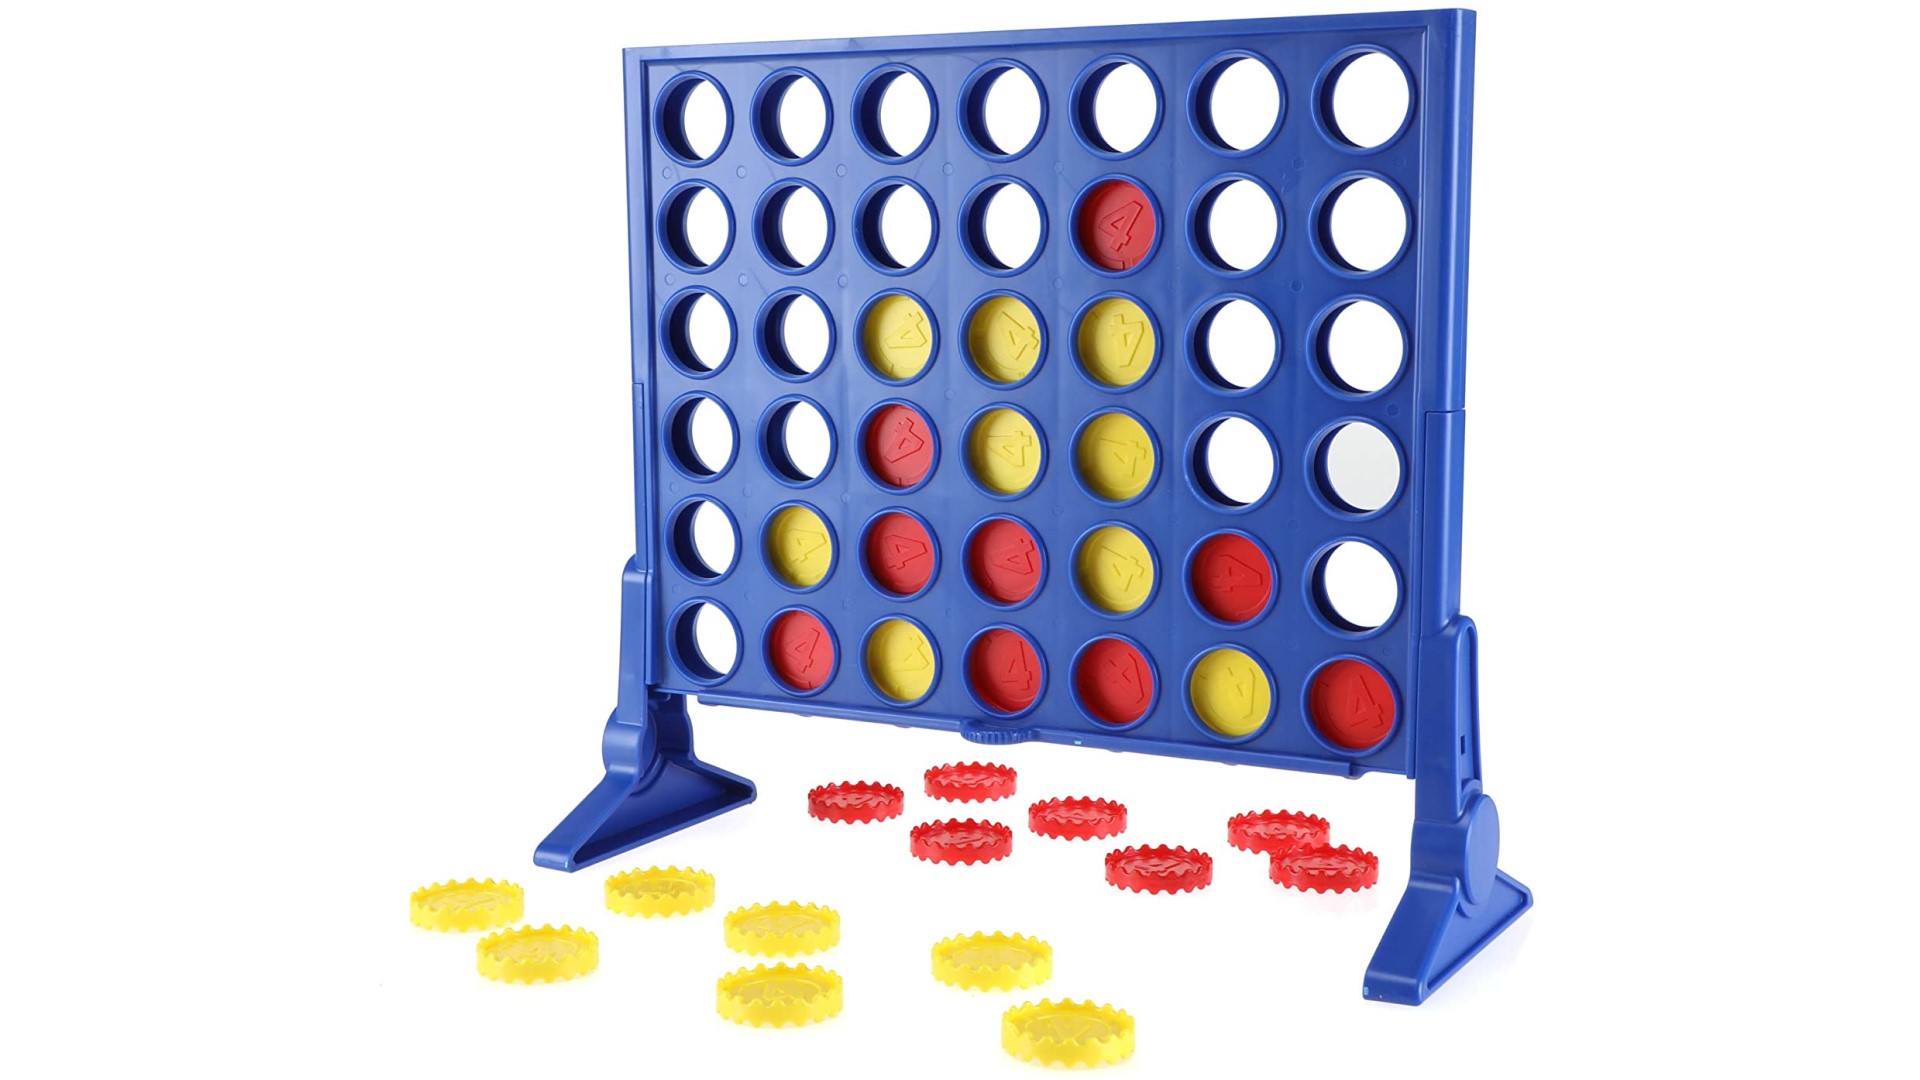 Best classic board games: Connect 4. Image shows a Connect 4 board with a game in progress.